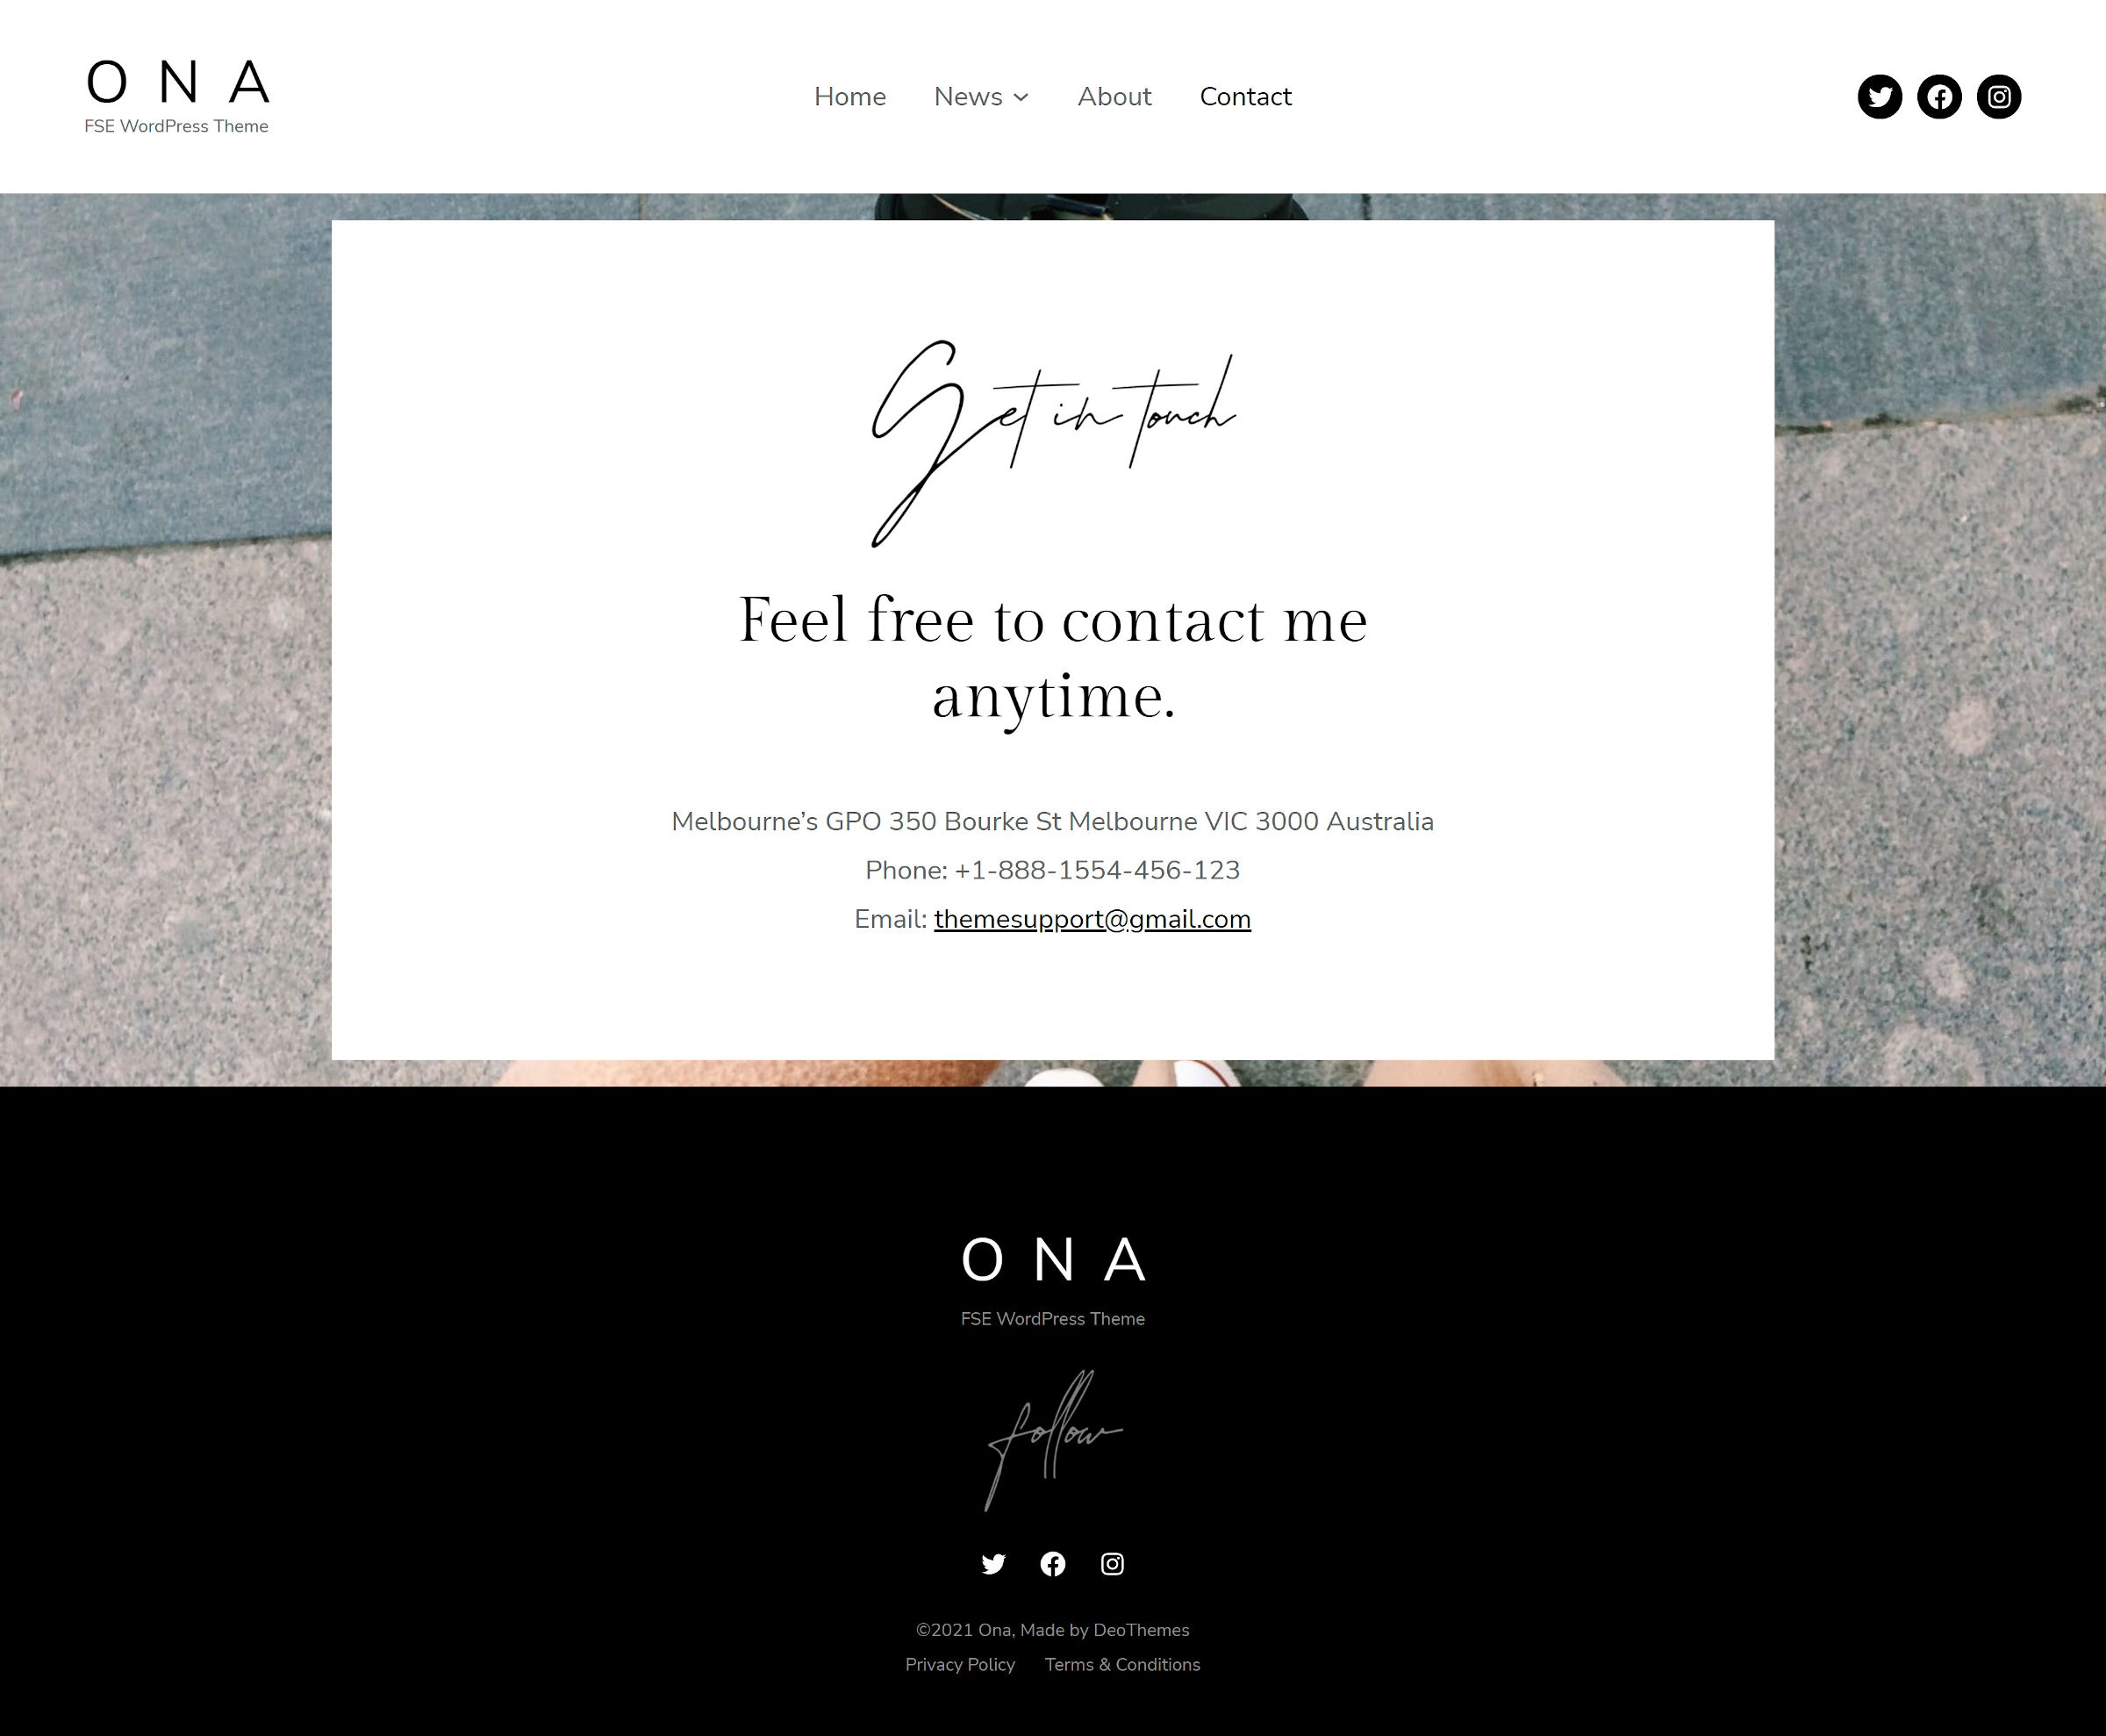 Contact page template from the Ona WordPress theme that features an address, phone number, and email.